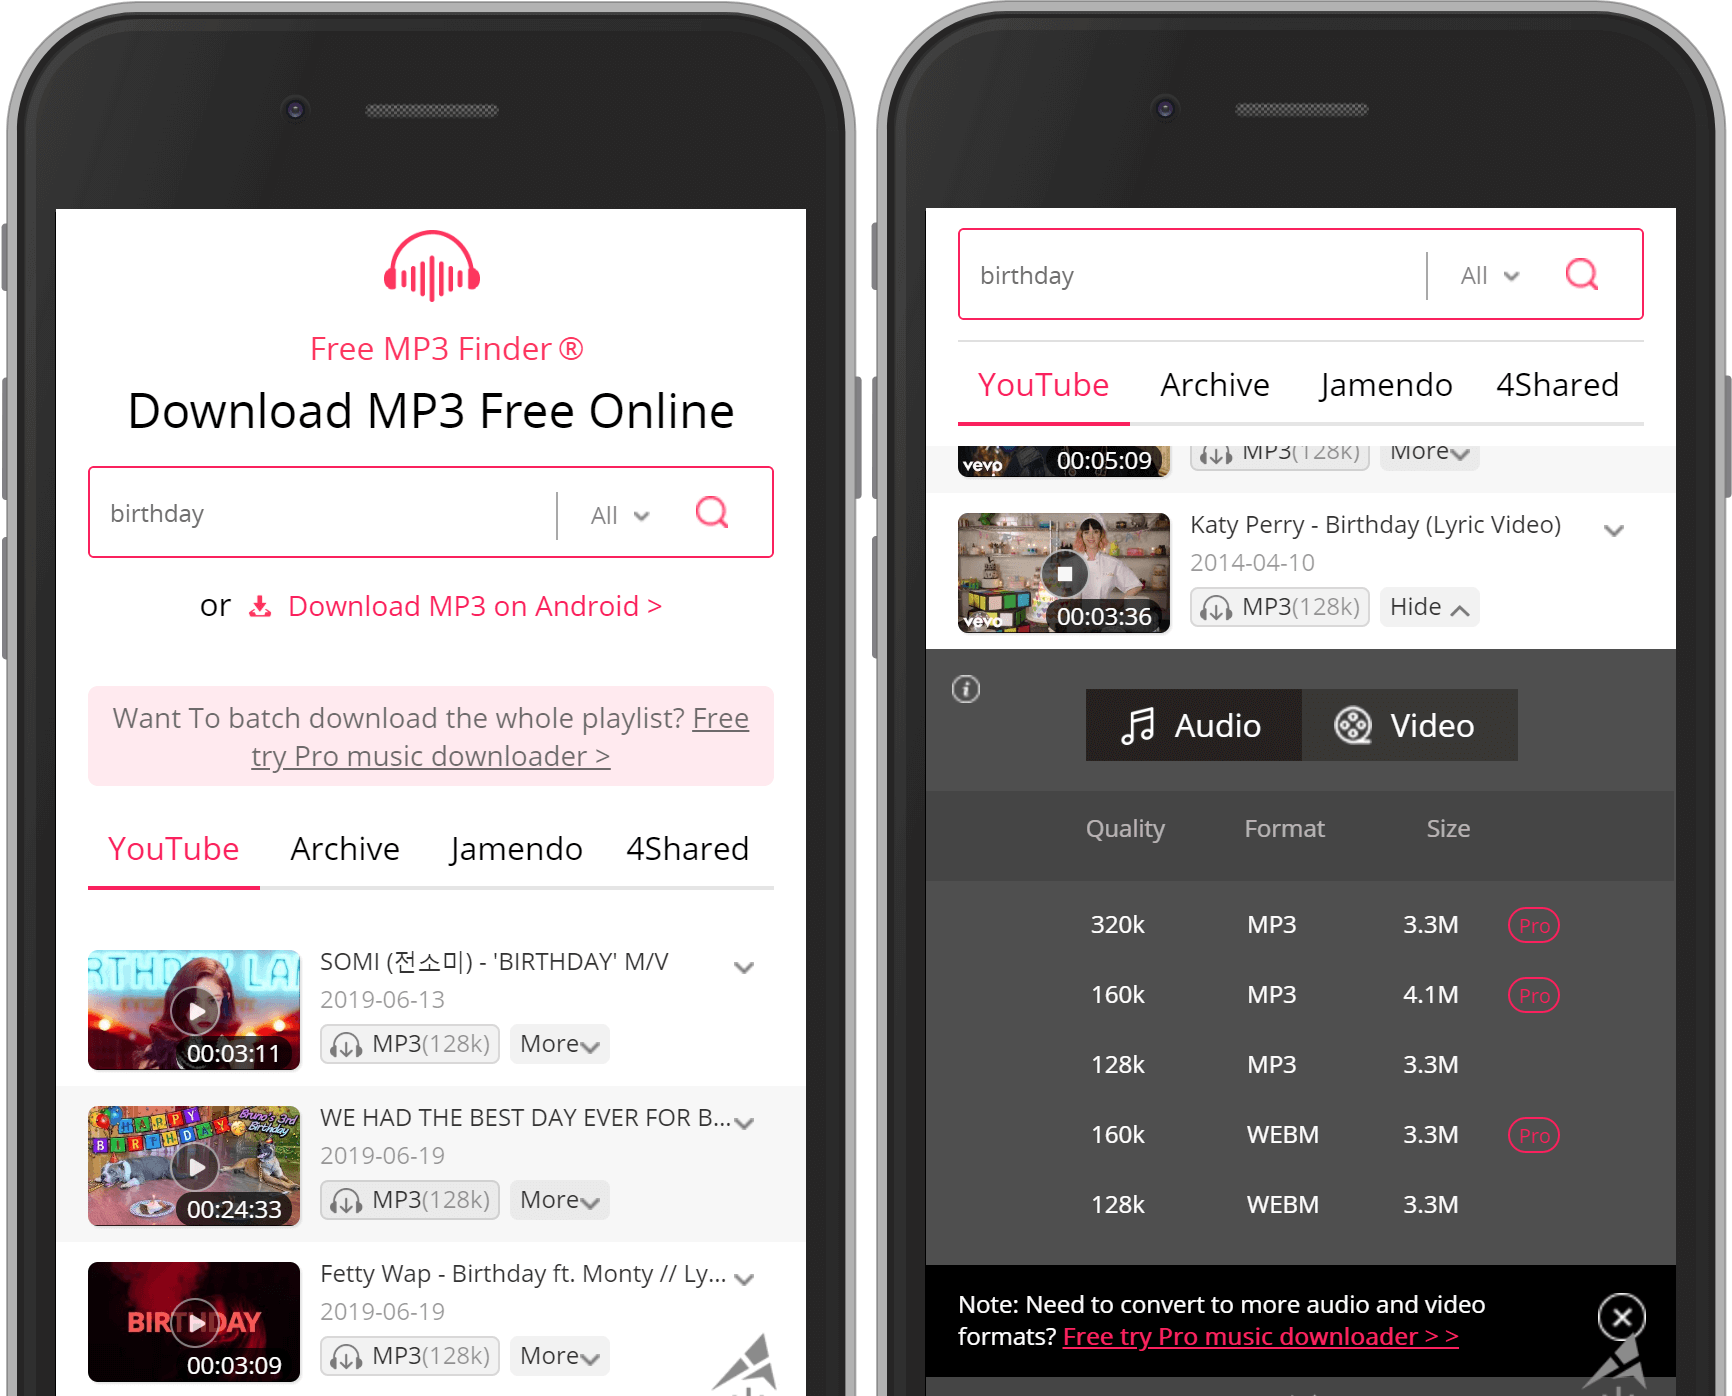 mobile interface of Free MP3 Finder